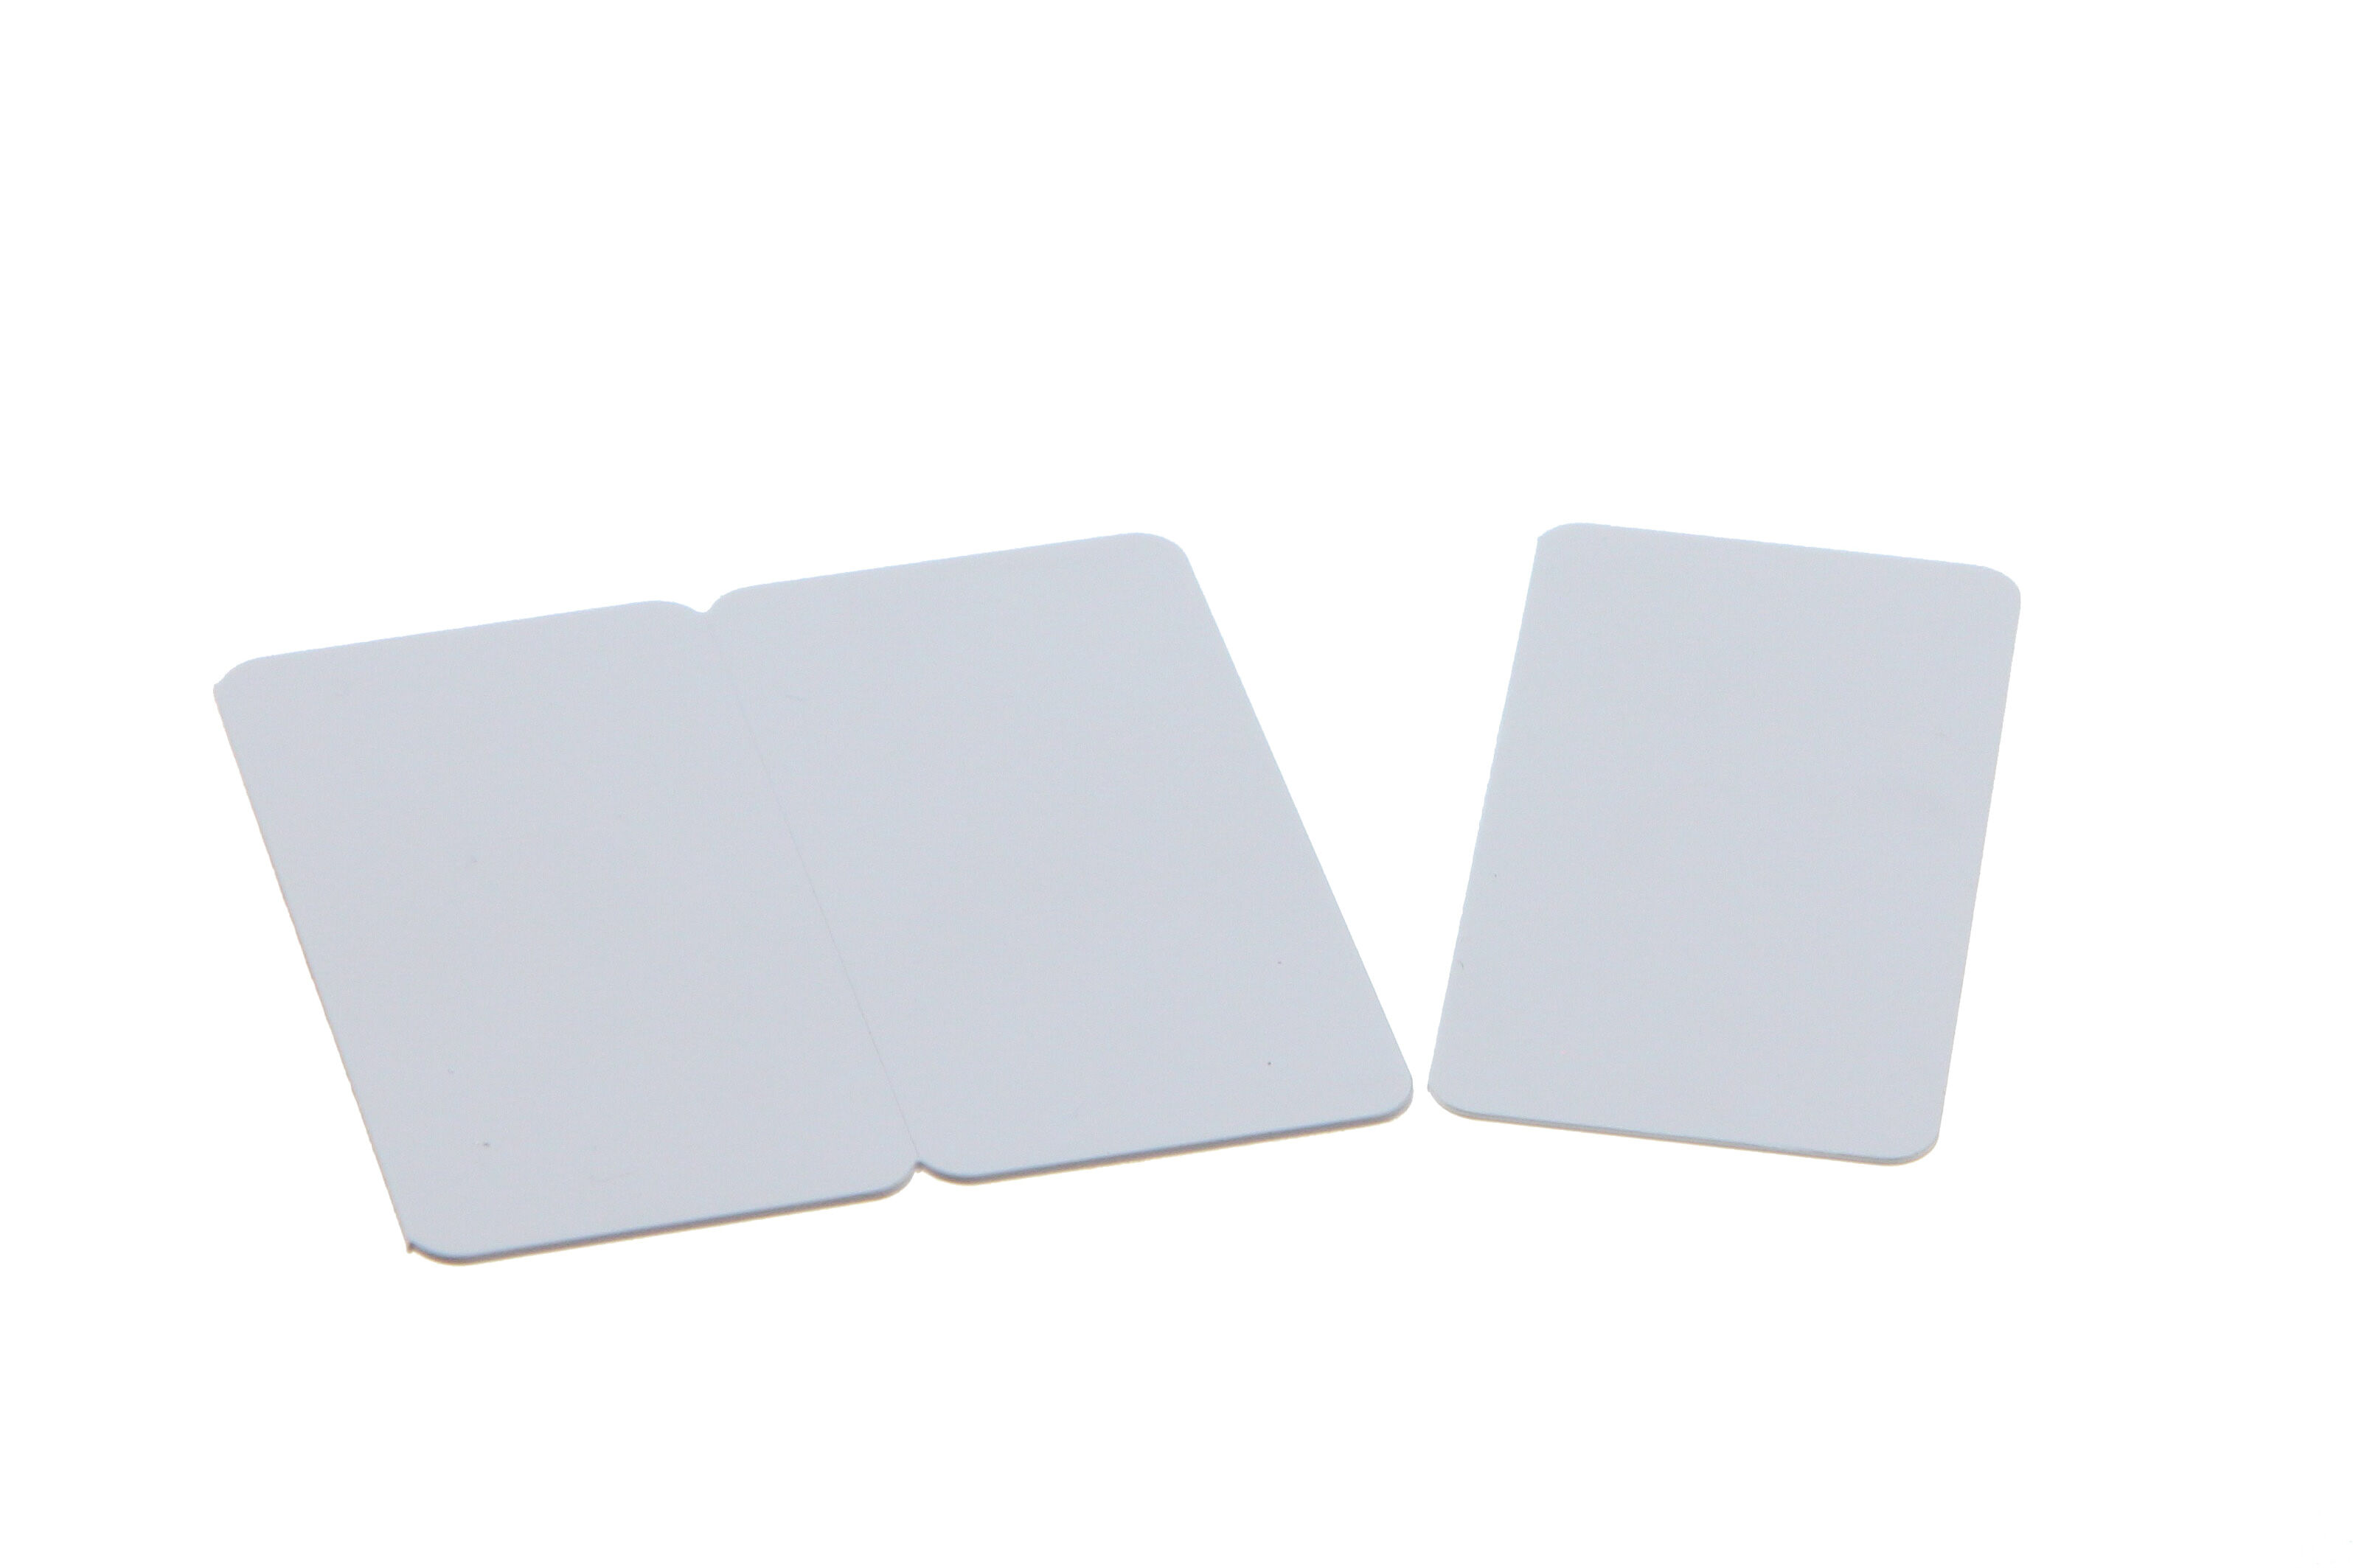 C4521 Food Label White 3Tag Cards